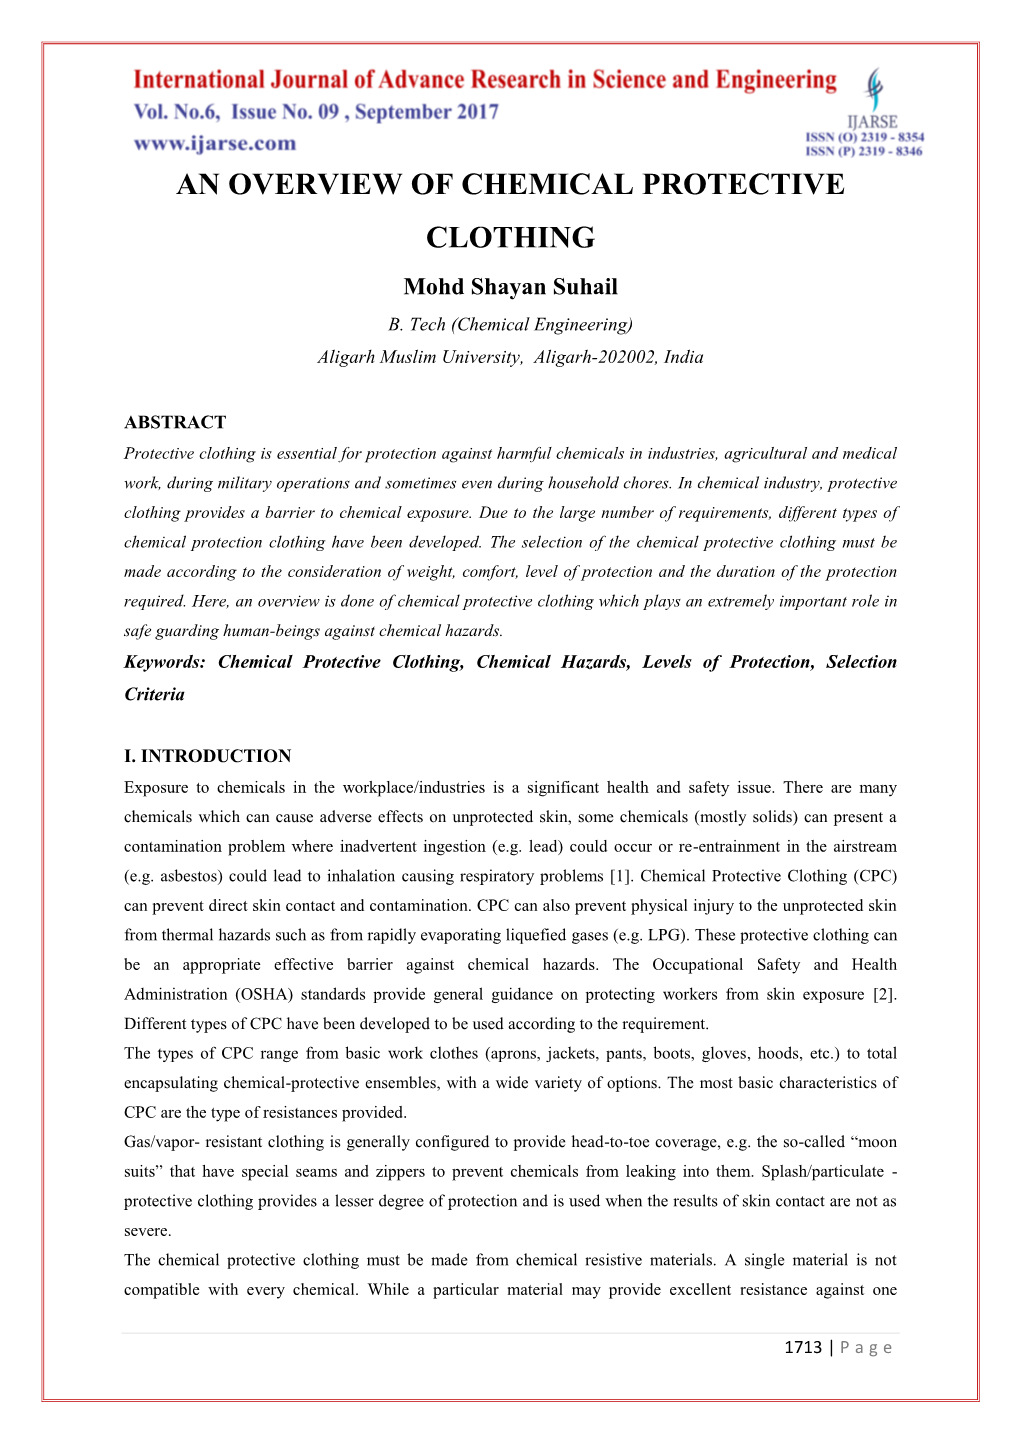 AN OVERVIEW of CHEMICAL PROTECTIVE CLOTHING Mohd Shayan Suhail B